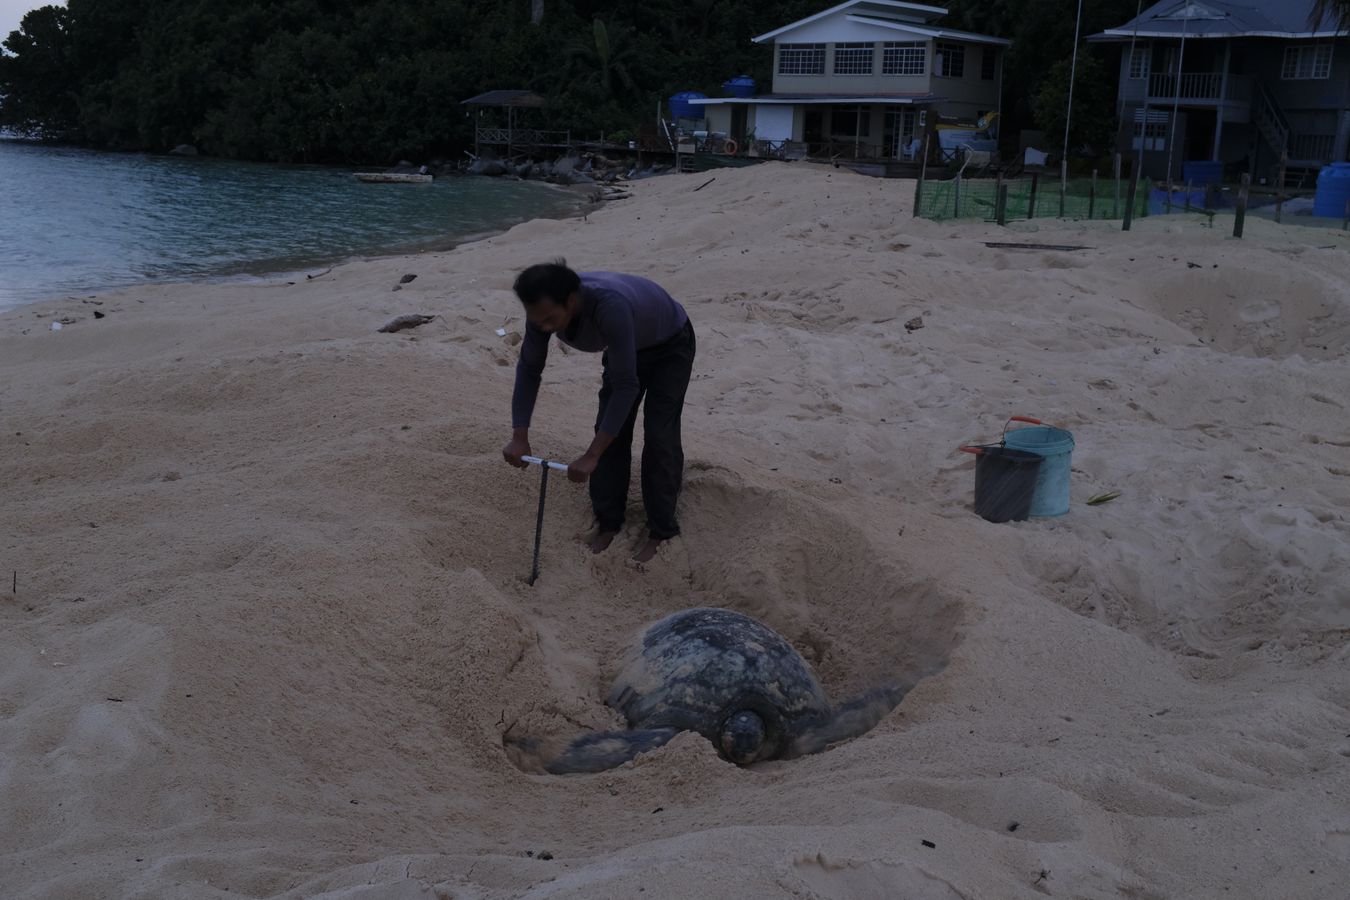 Ranger uses the tool to find the exact spot where the green turtle just laid eggs.